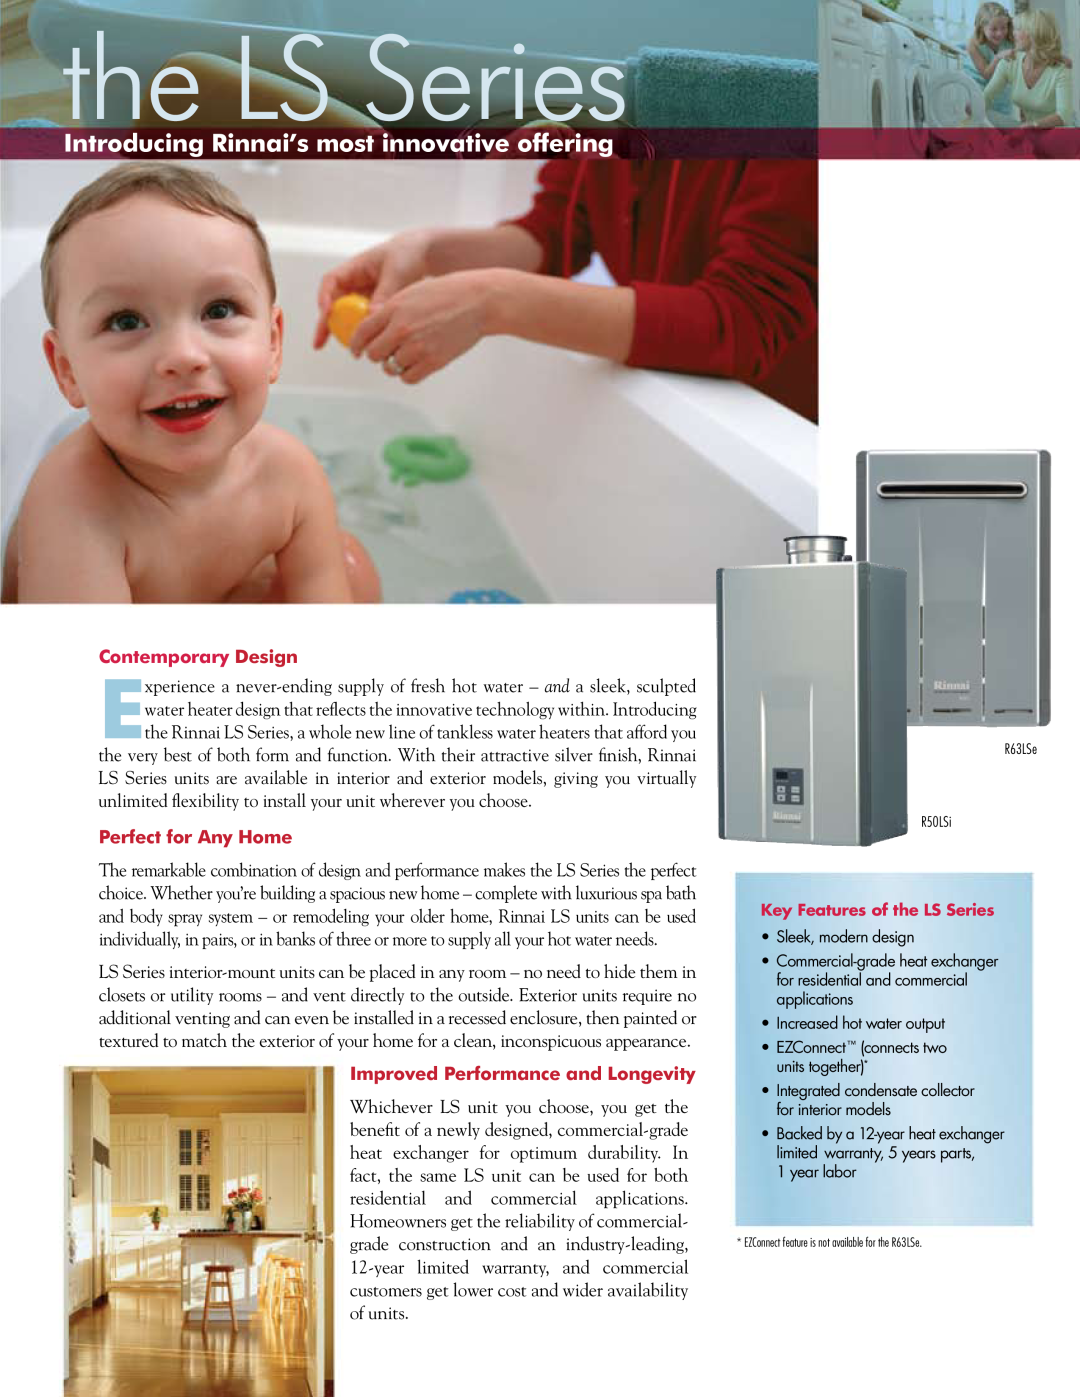 Rinnai R98LS manual the LS Series, Introducing Rinnai’s most innovative offering, Contemporary Design, Perfect for Any Home 